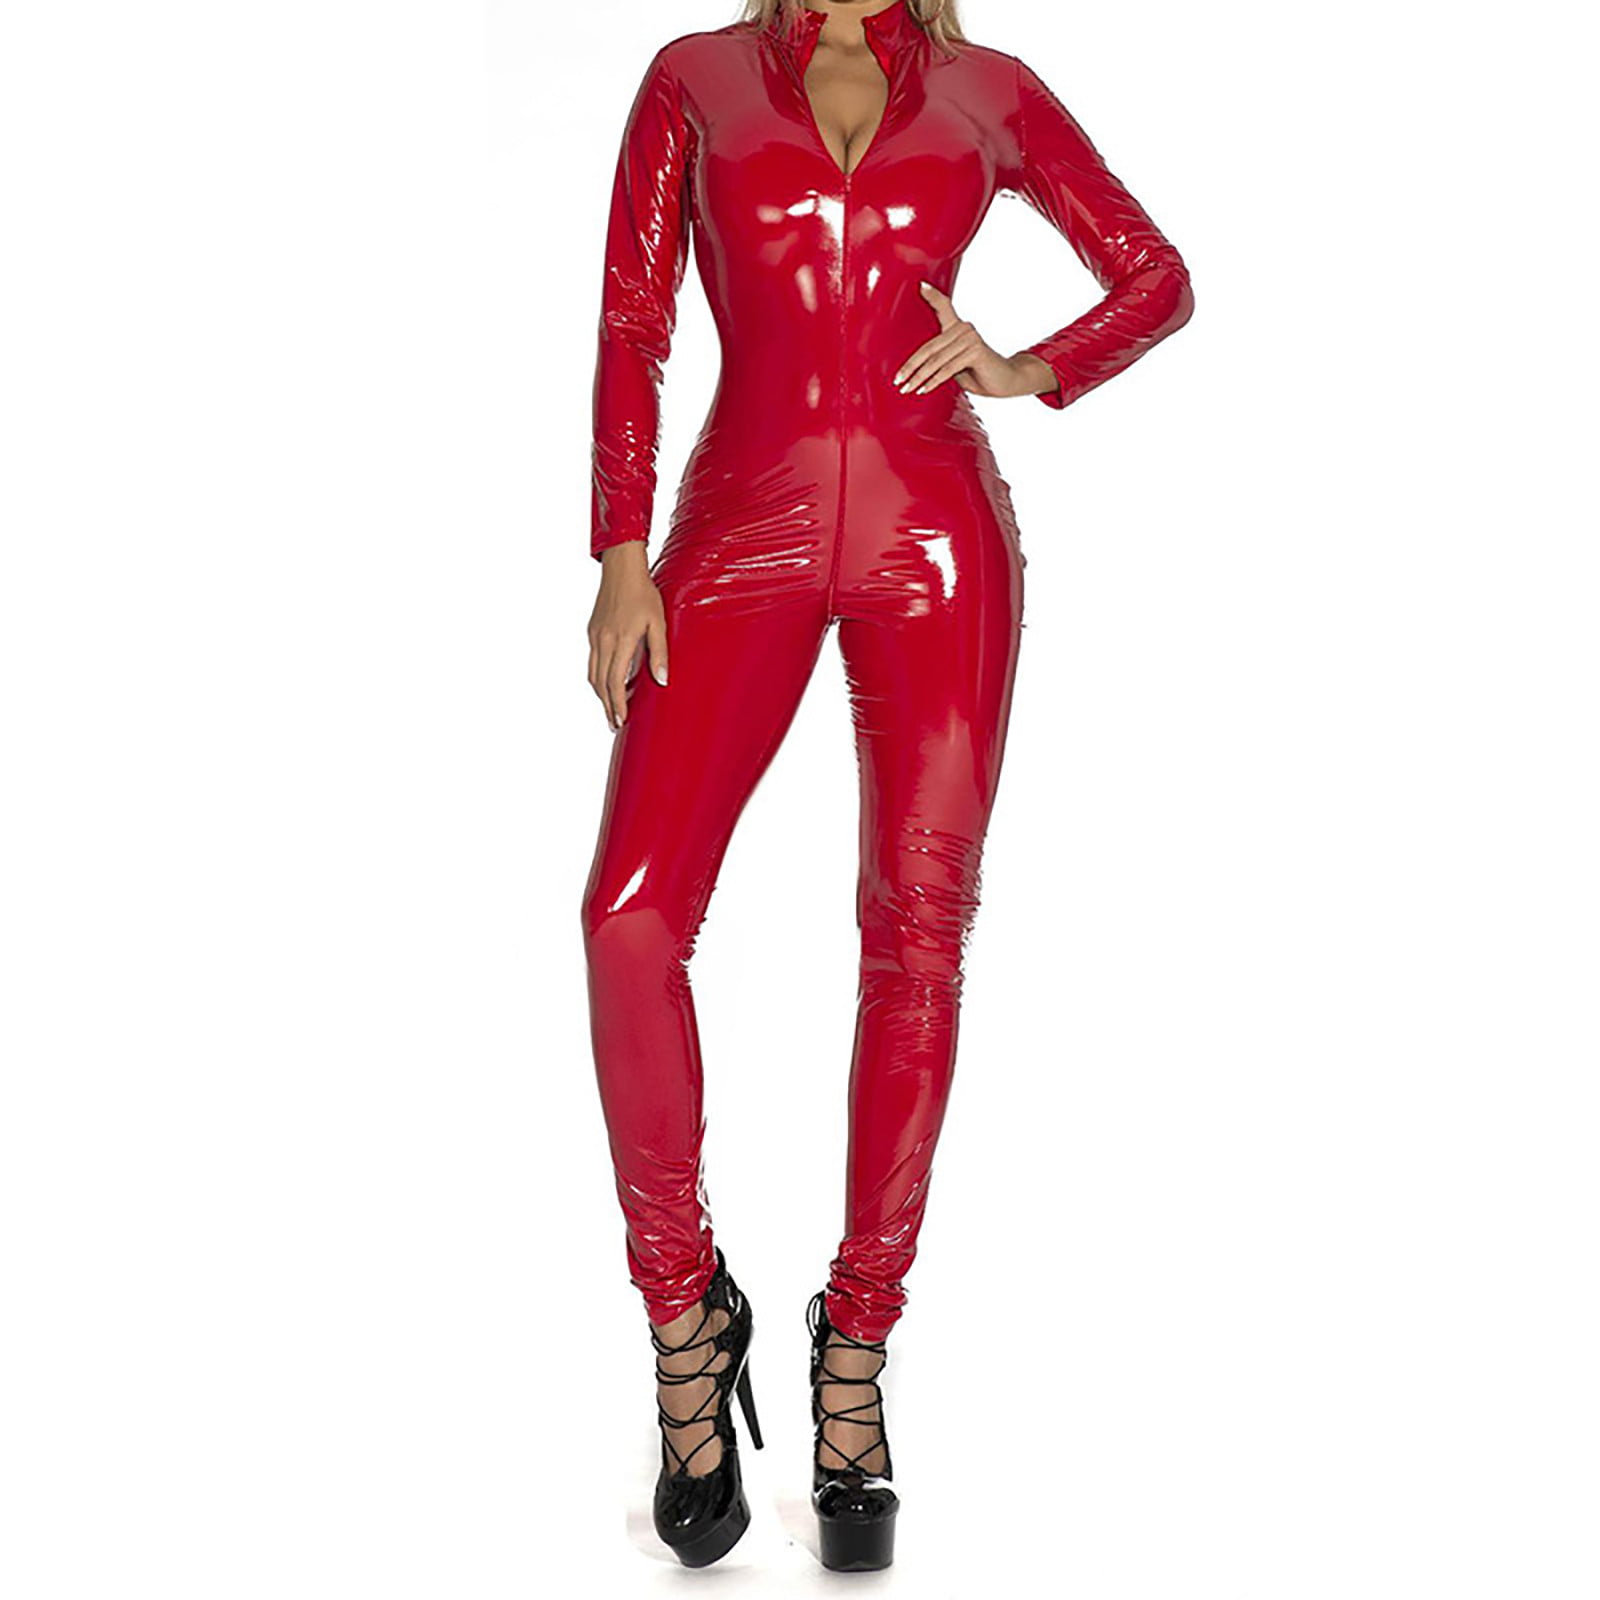 WGOUP Women's Leather Bodysuit Latex Overall Catsuit Sexy Jumpsuit Full Body  Suit Long Sleeve Body Leggings Erotic Lingerie Clubwear,Black 